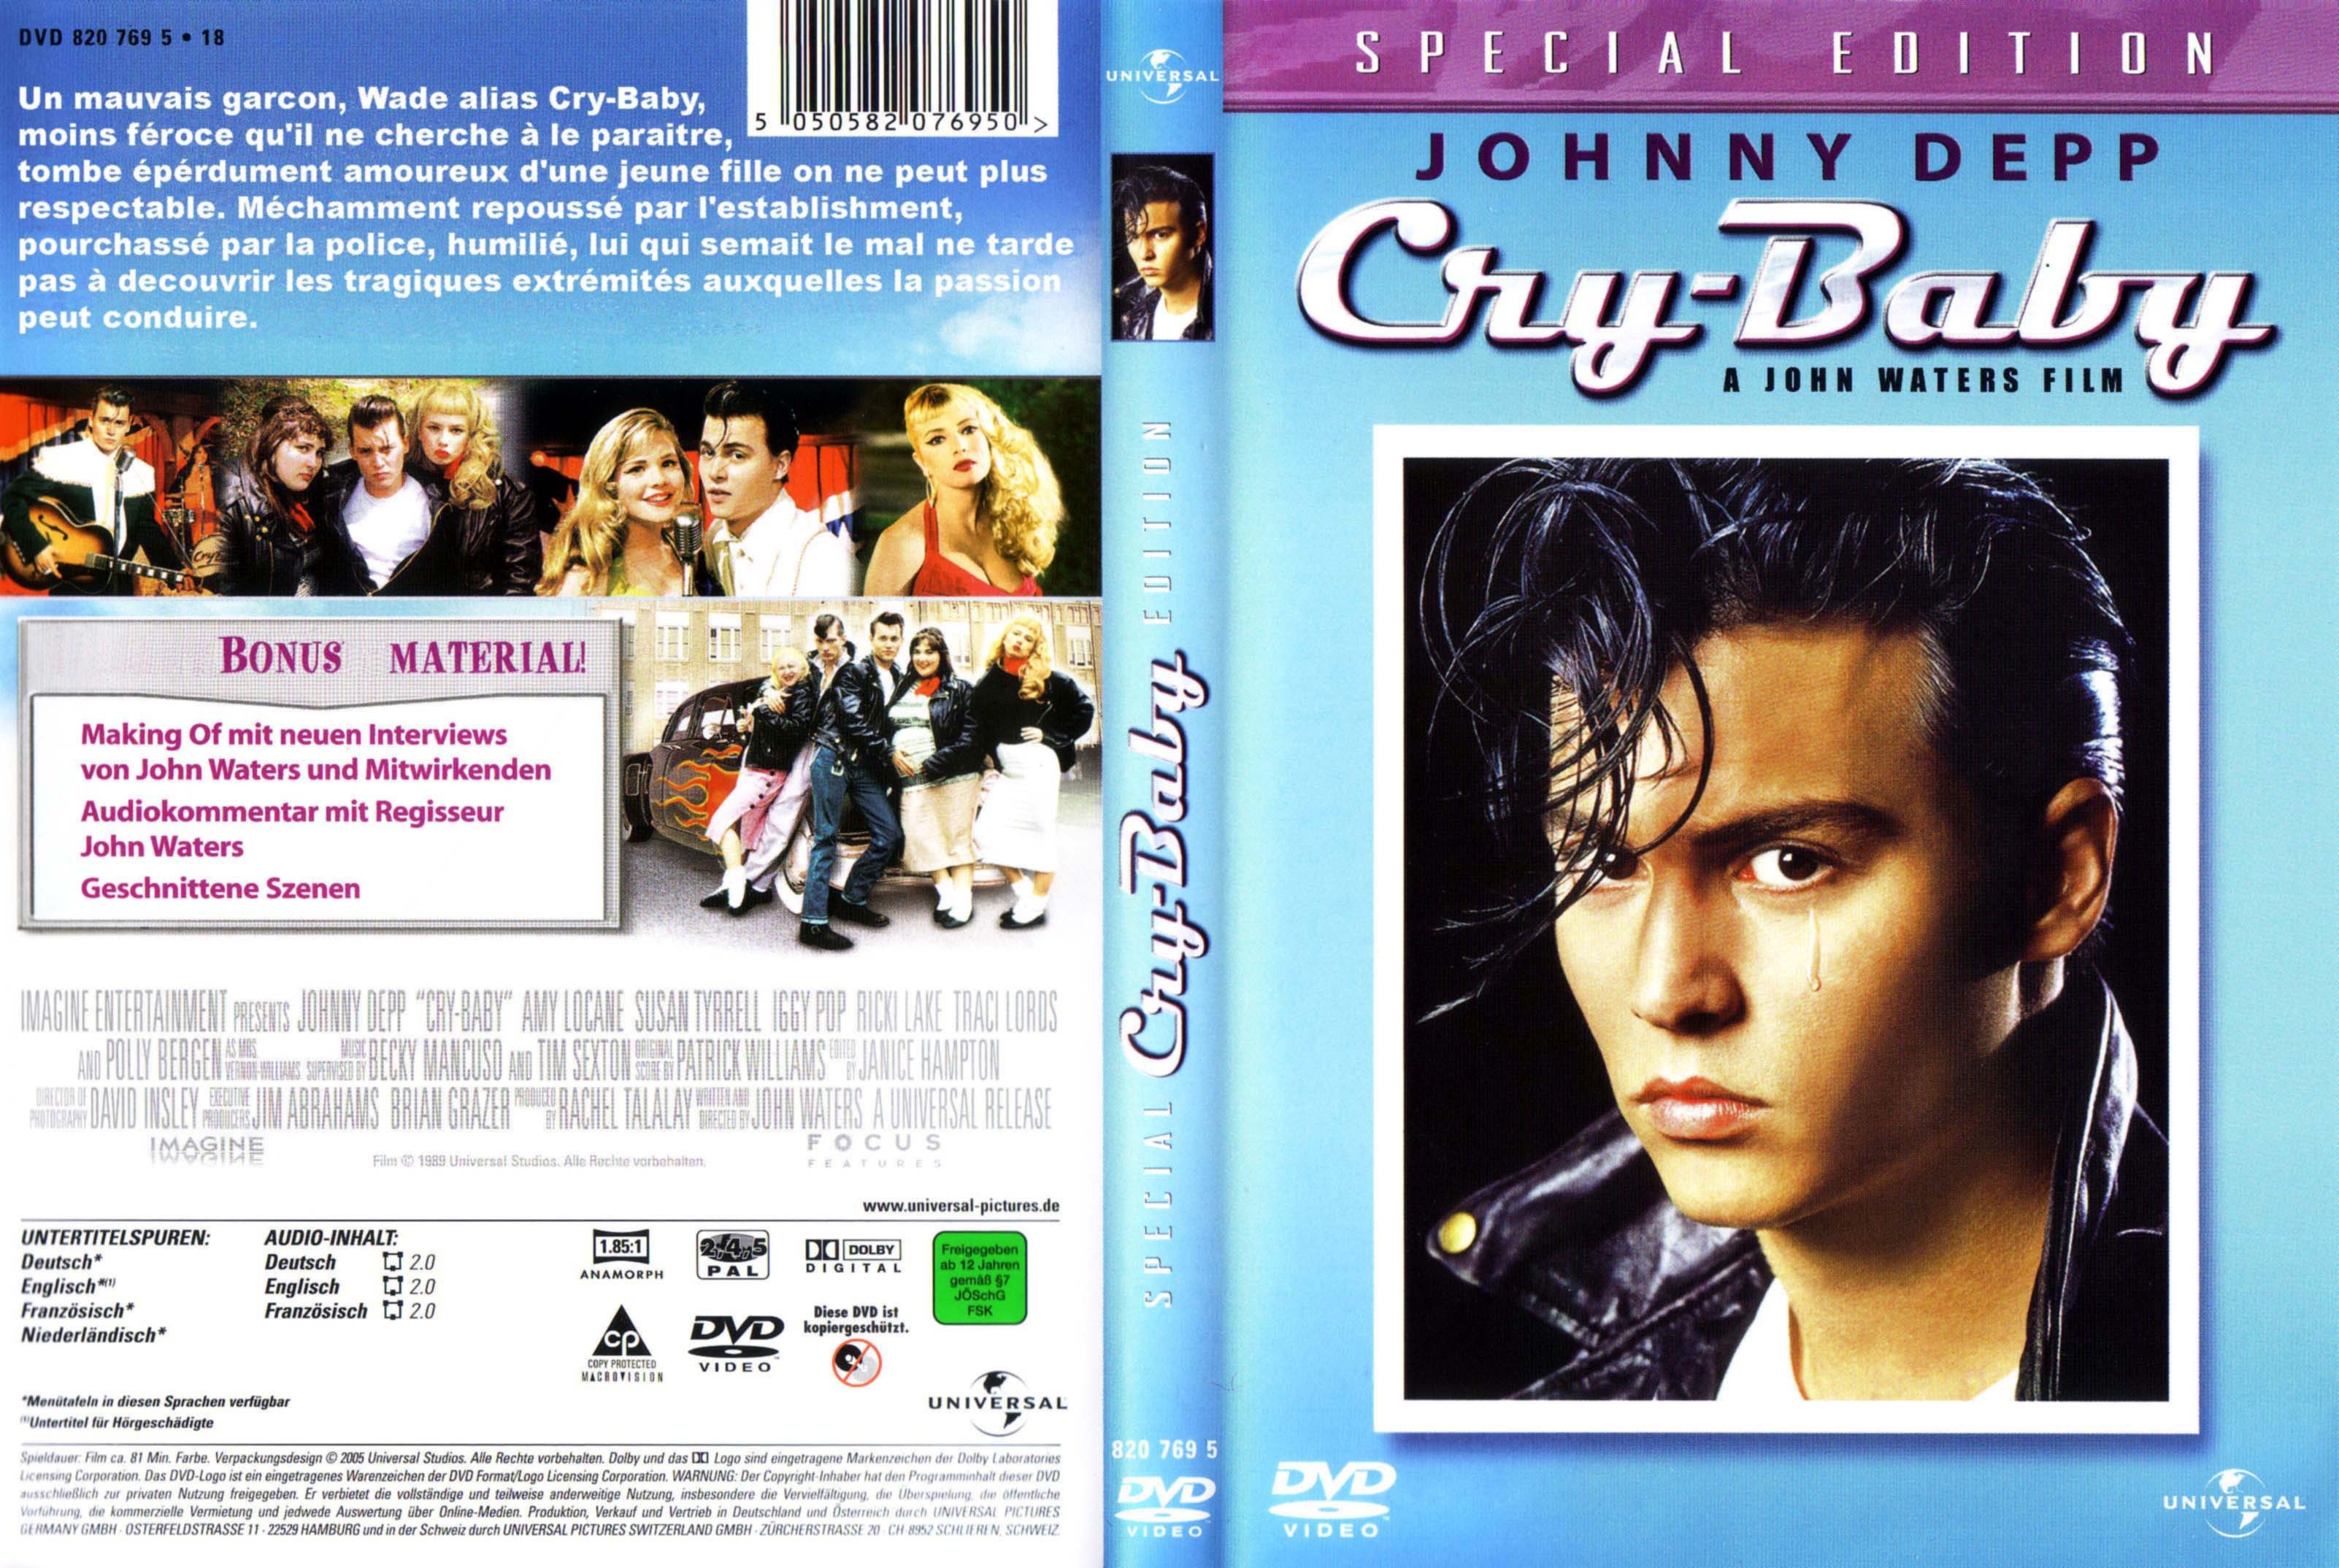 Jaquette DVD Cry Baby v2